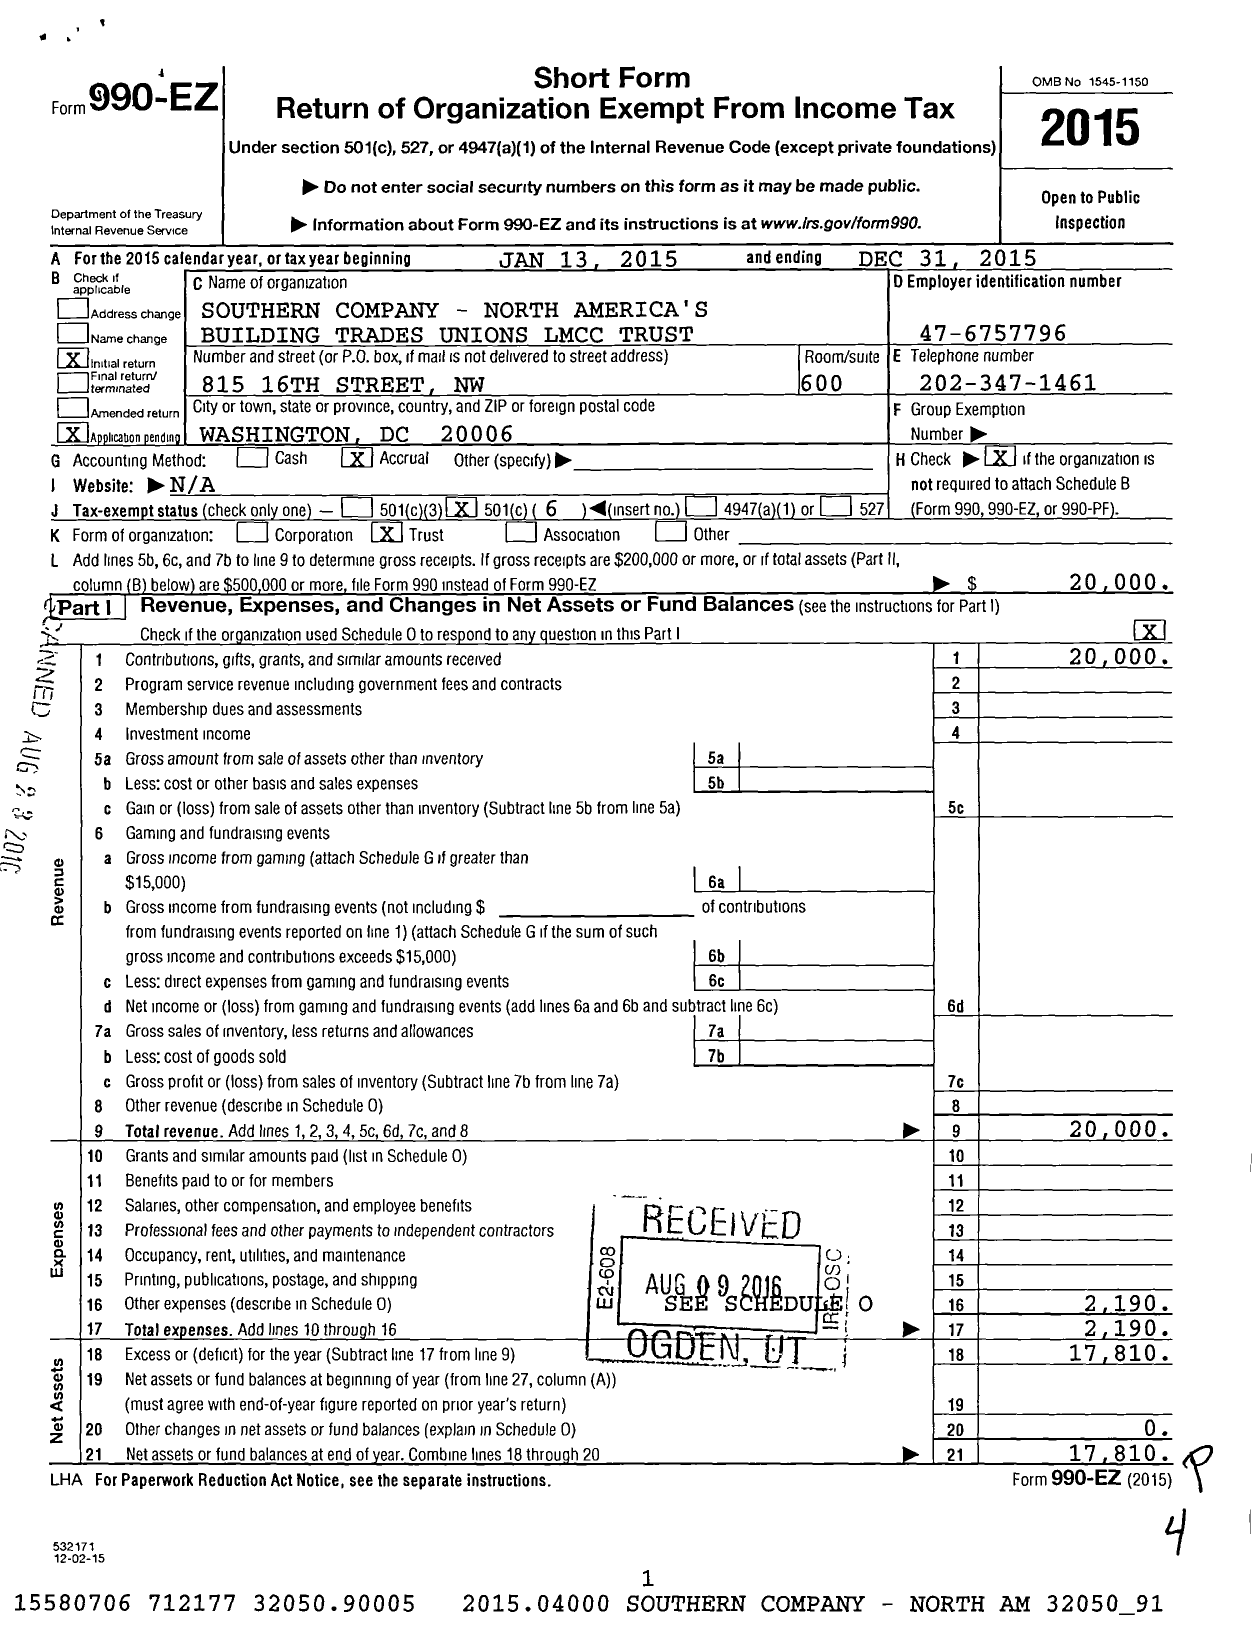 Image of first page of 2015 Form 990EO for Southern Company - North America's Building Trades Unions LMCC Trust